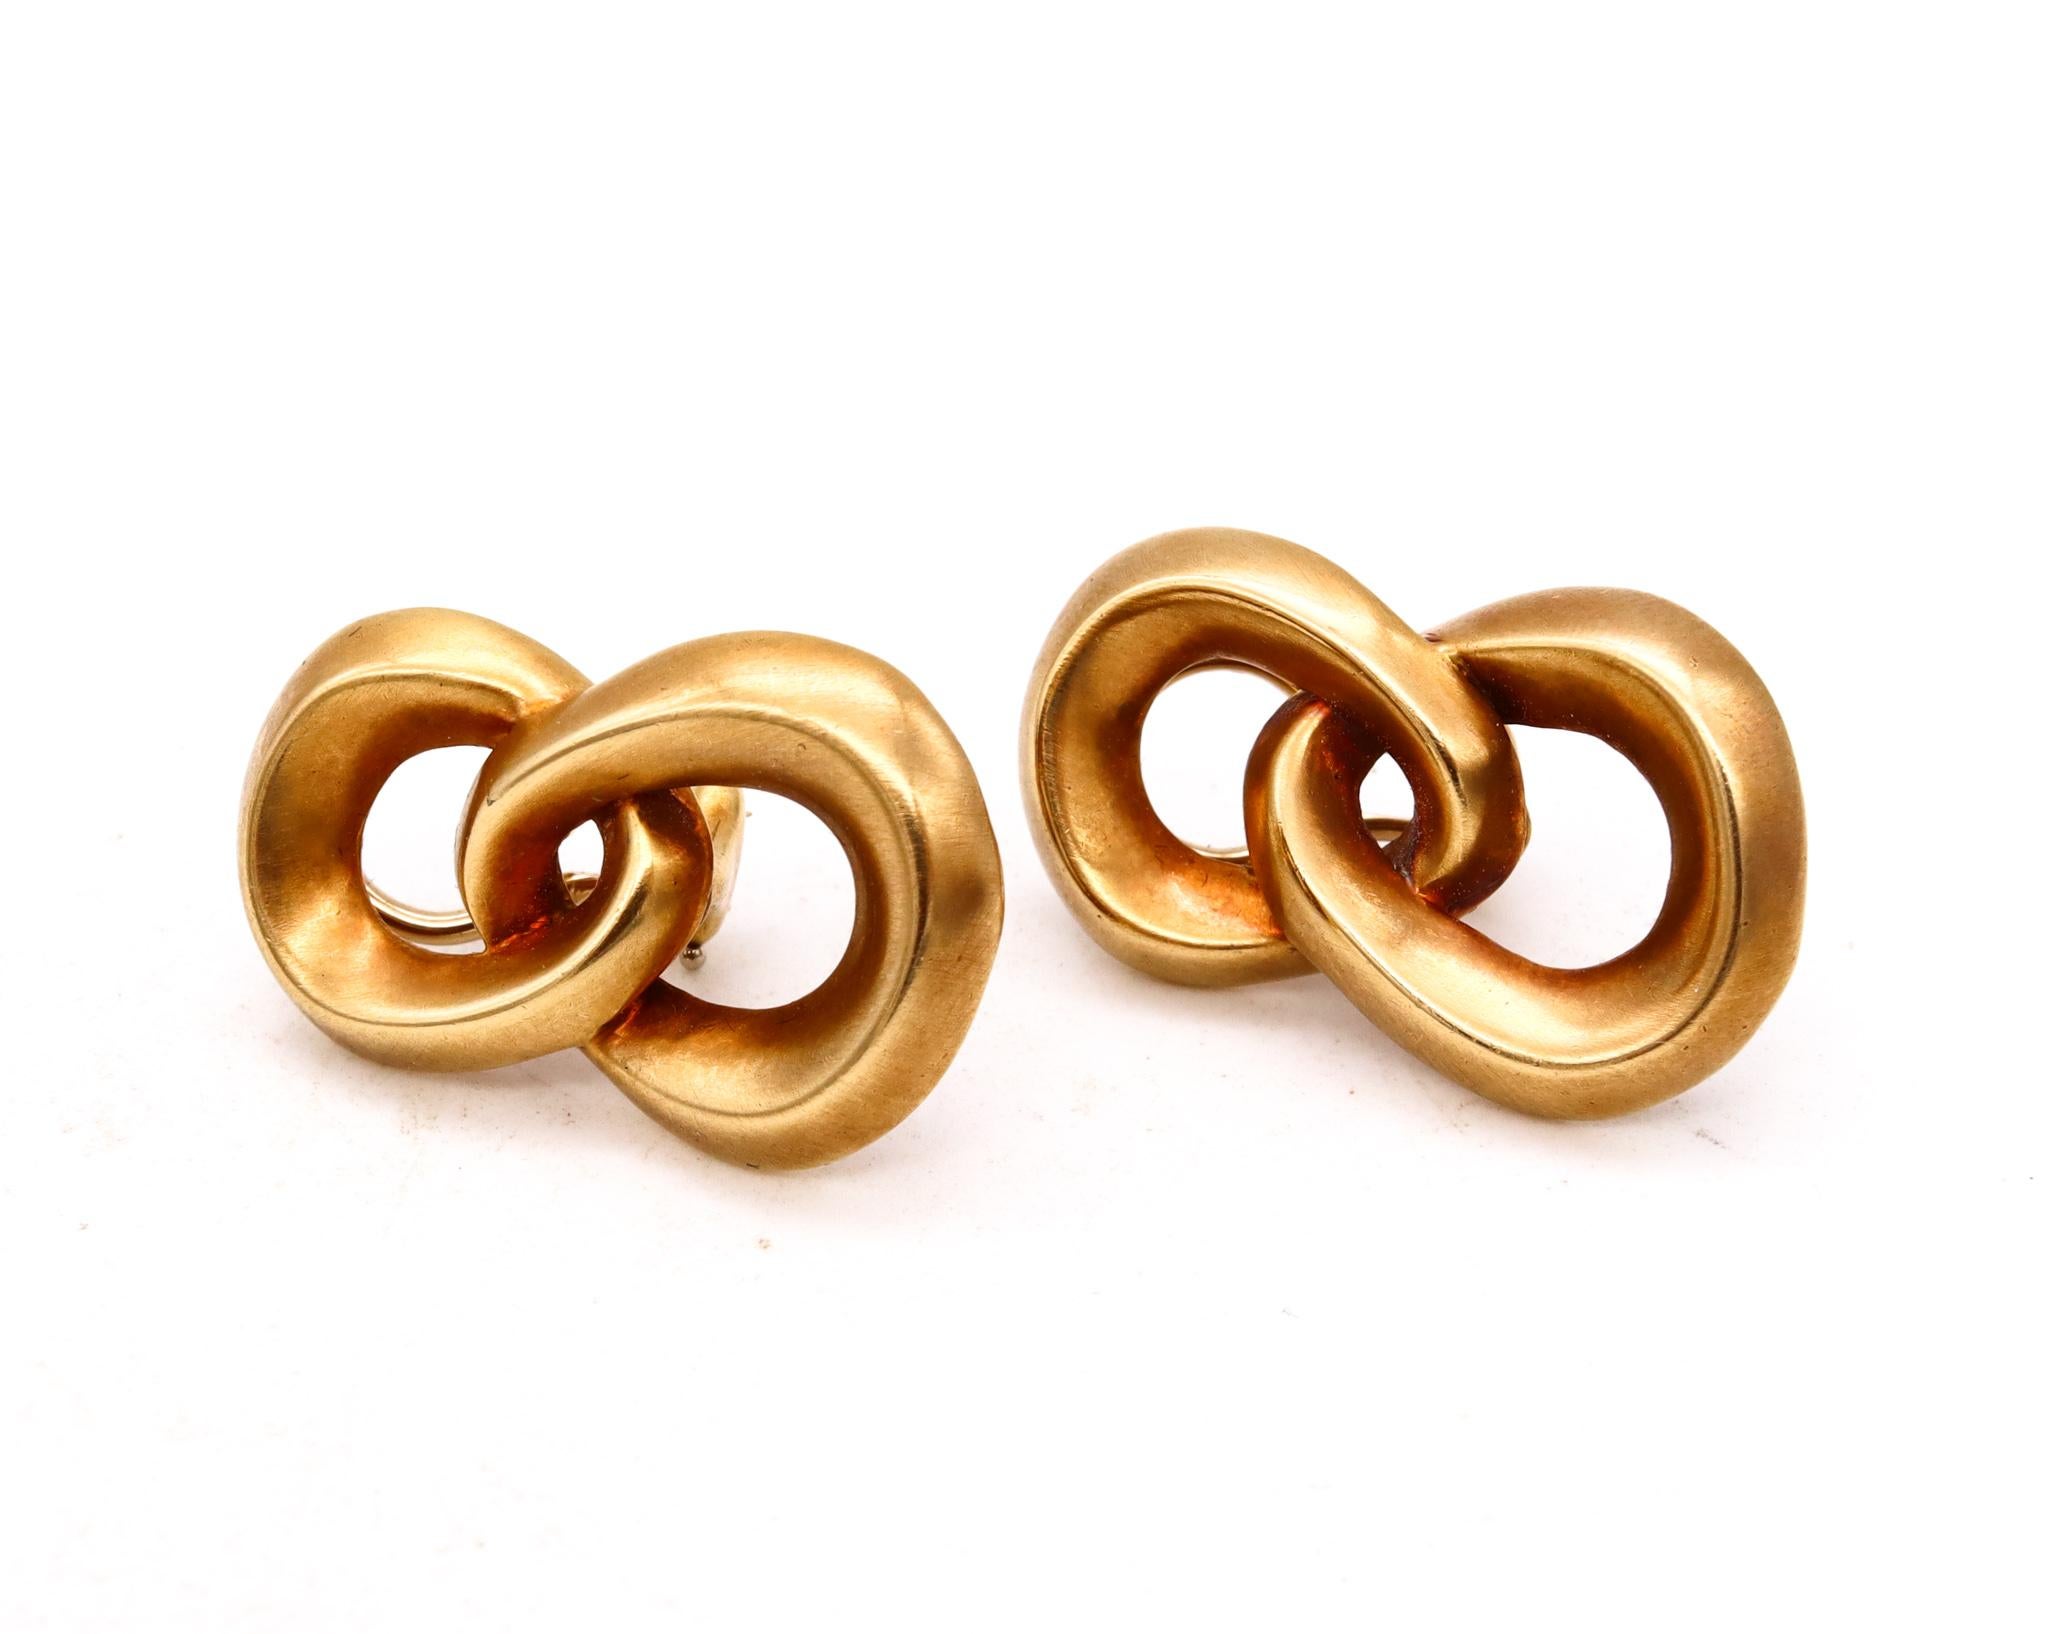 Angela Cummings 1986 New York Studios Double Circled Earrings in Solid 18Kt Gold 1